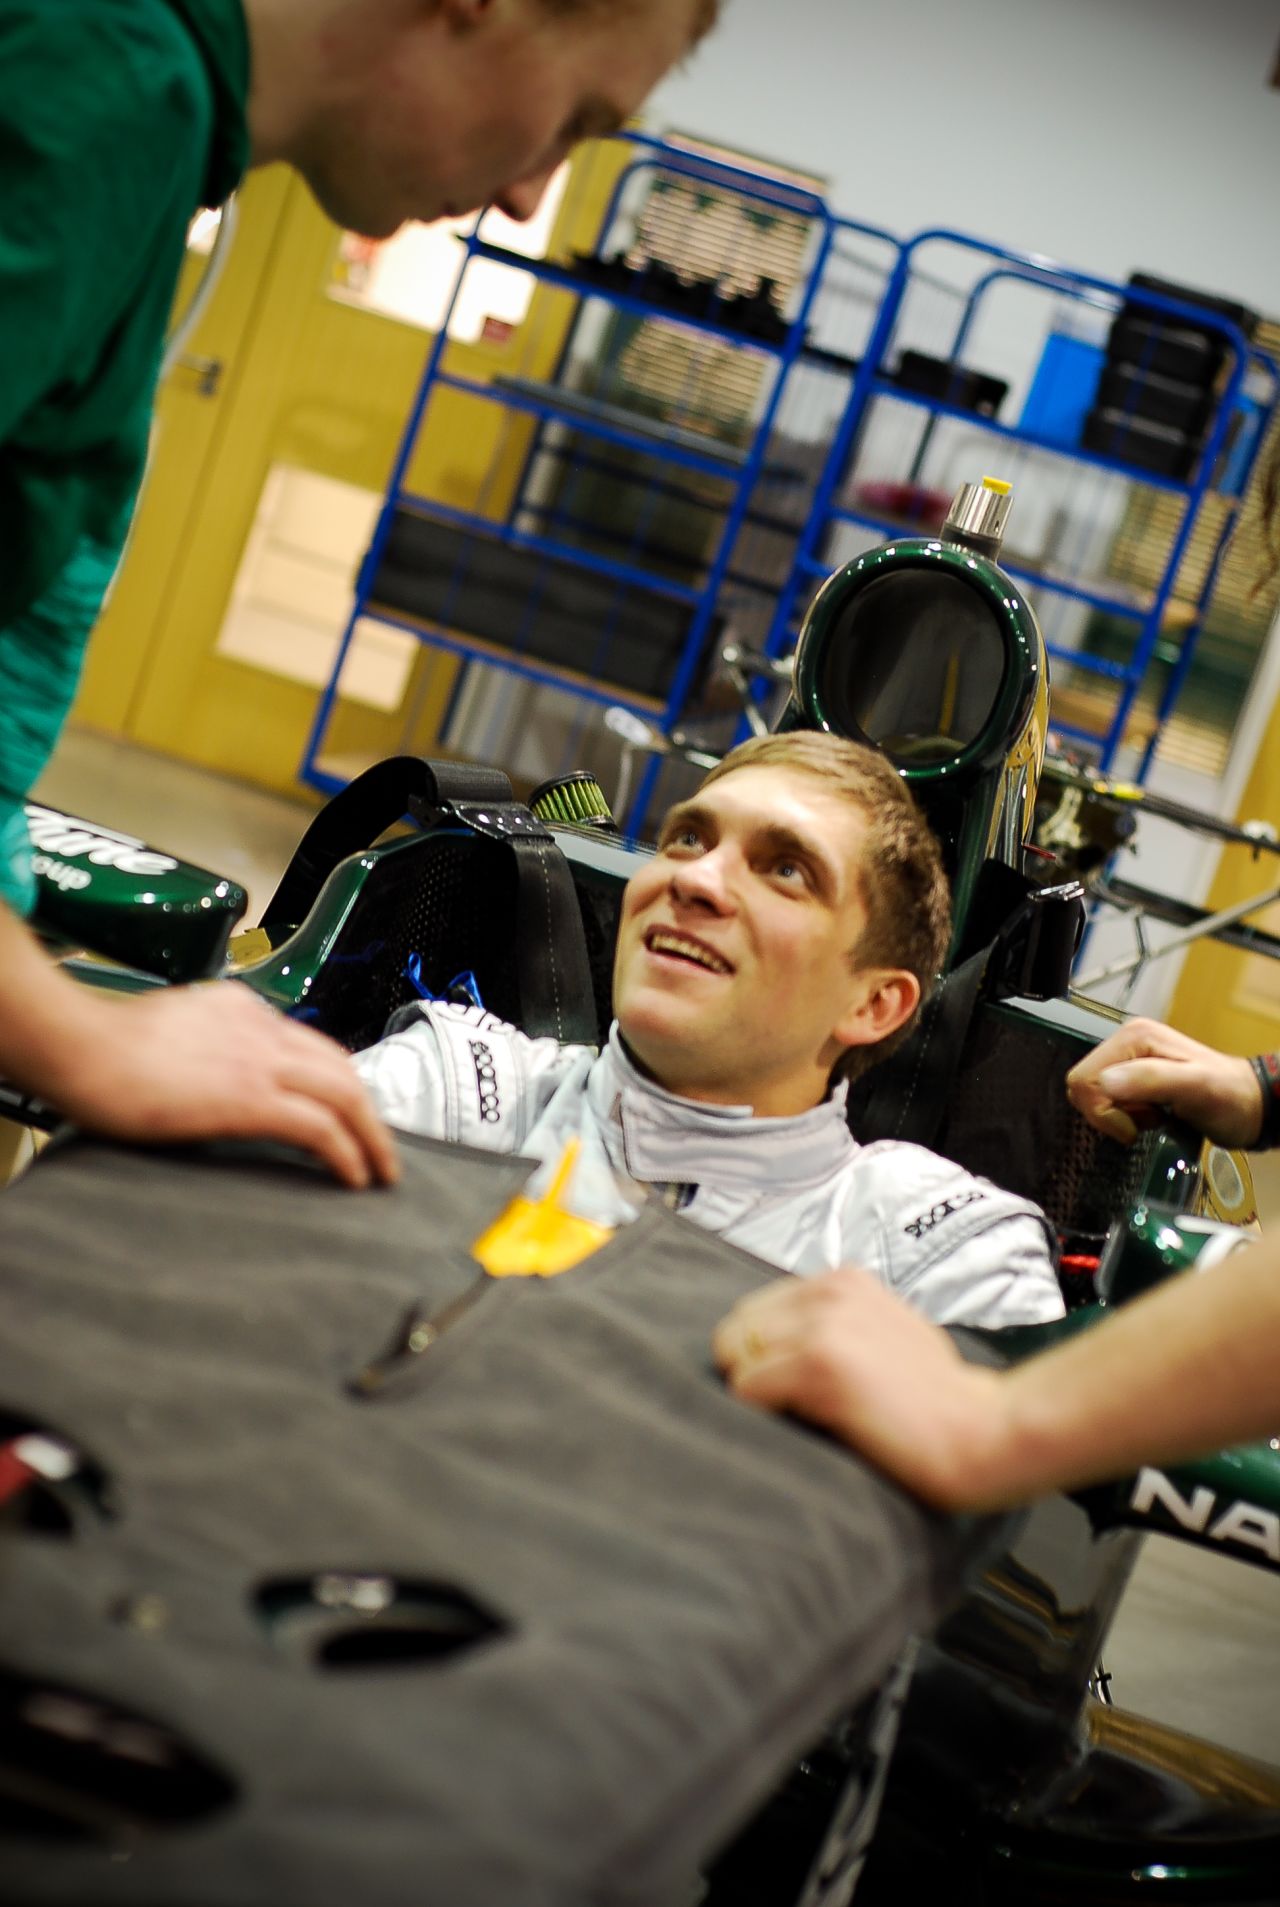 The CNN-sponsored Caterham team have revealed Russian driver Vitaly Petrov will replace Italy's Jarno Trulli for the 2012 Formula One season.